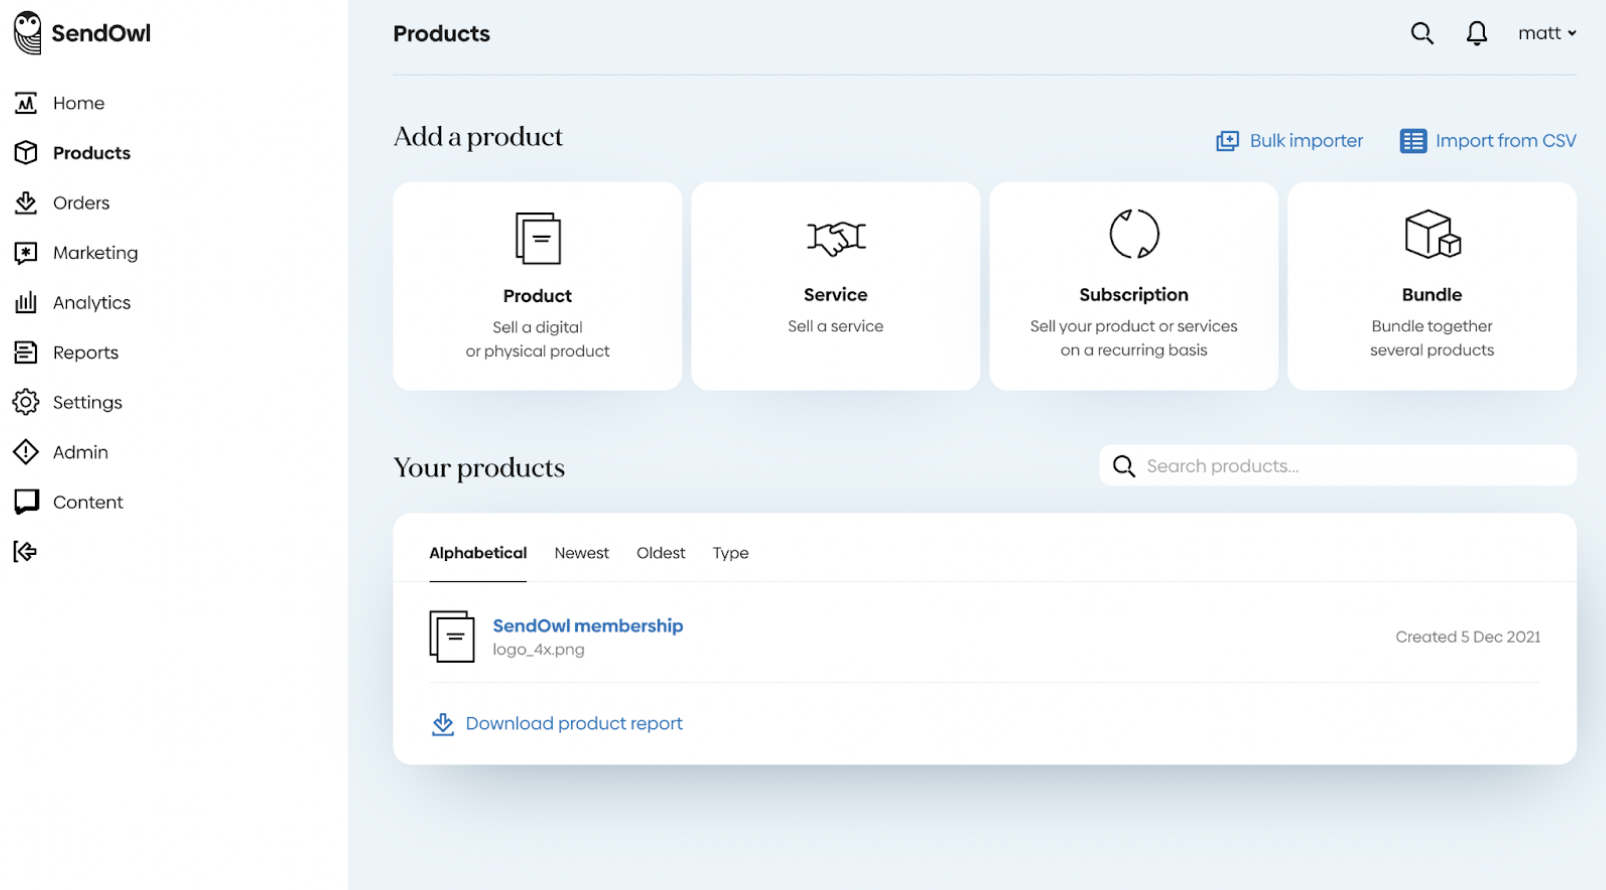 SendOwl, a platform for selling digital goods, raises $4.5M from Defy.vc, Stripe and others